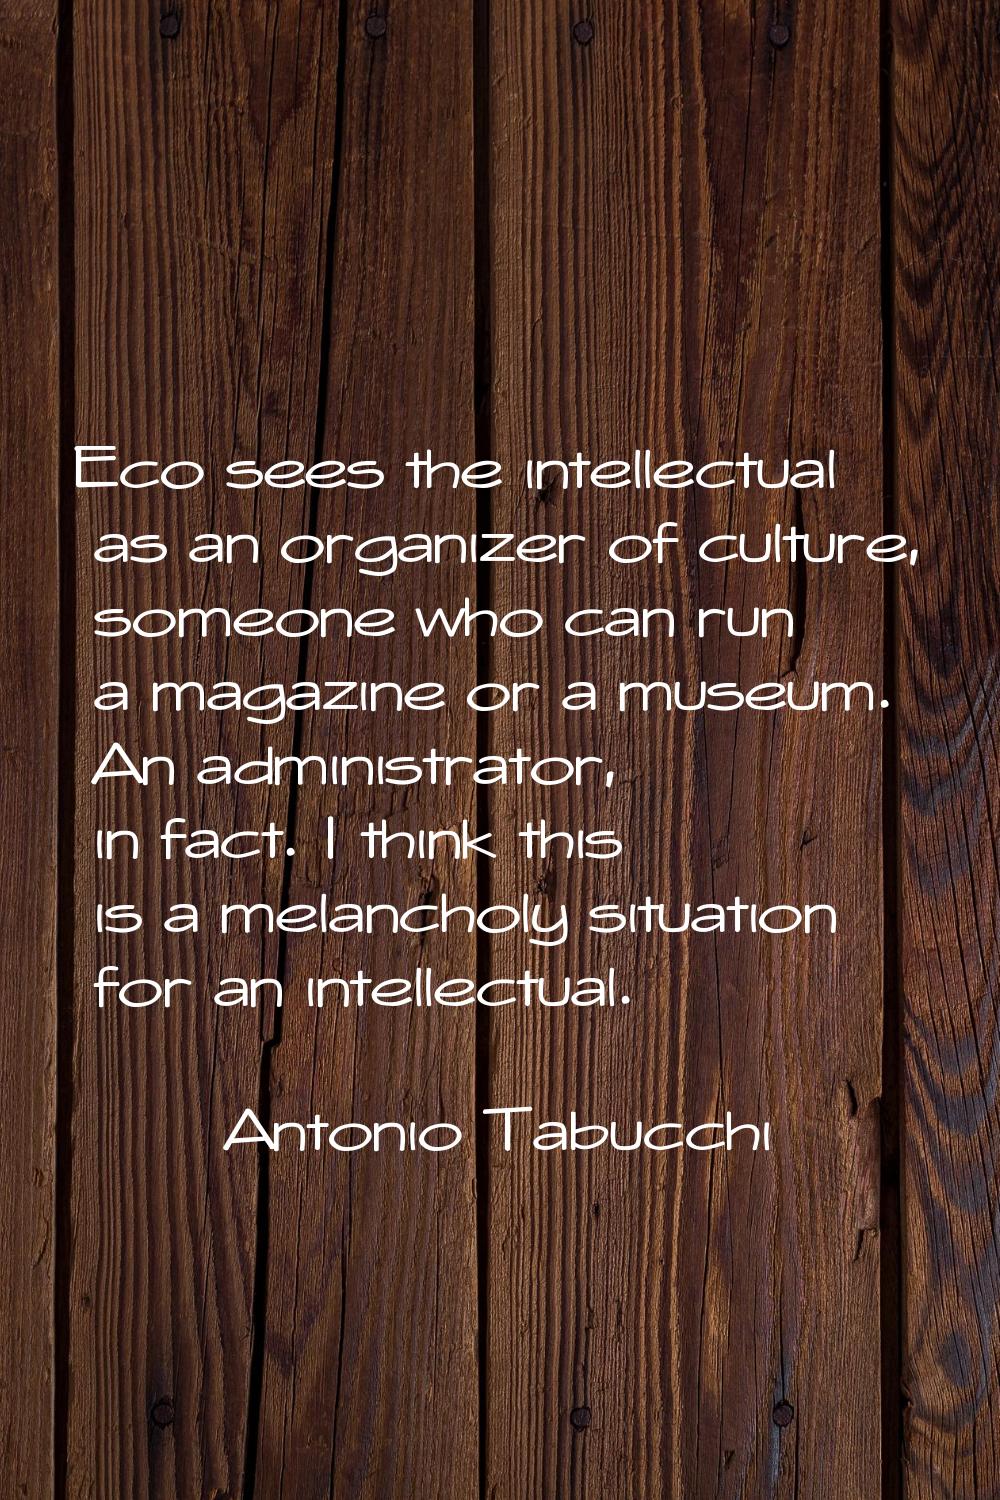 Eco sees the intellectual as an organizer of culture, someone who can run a magazine or a museum. A